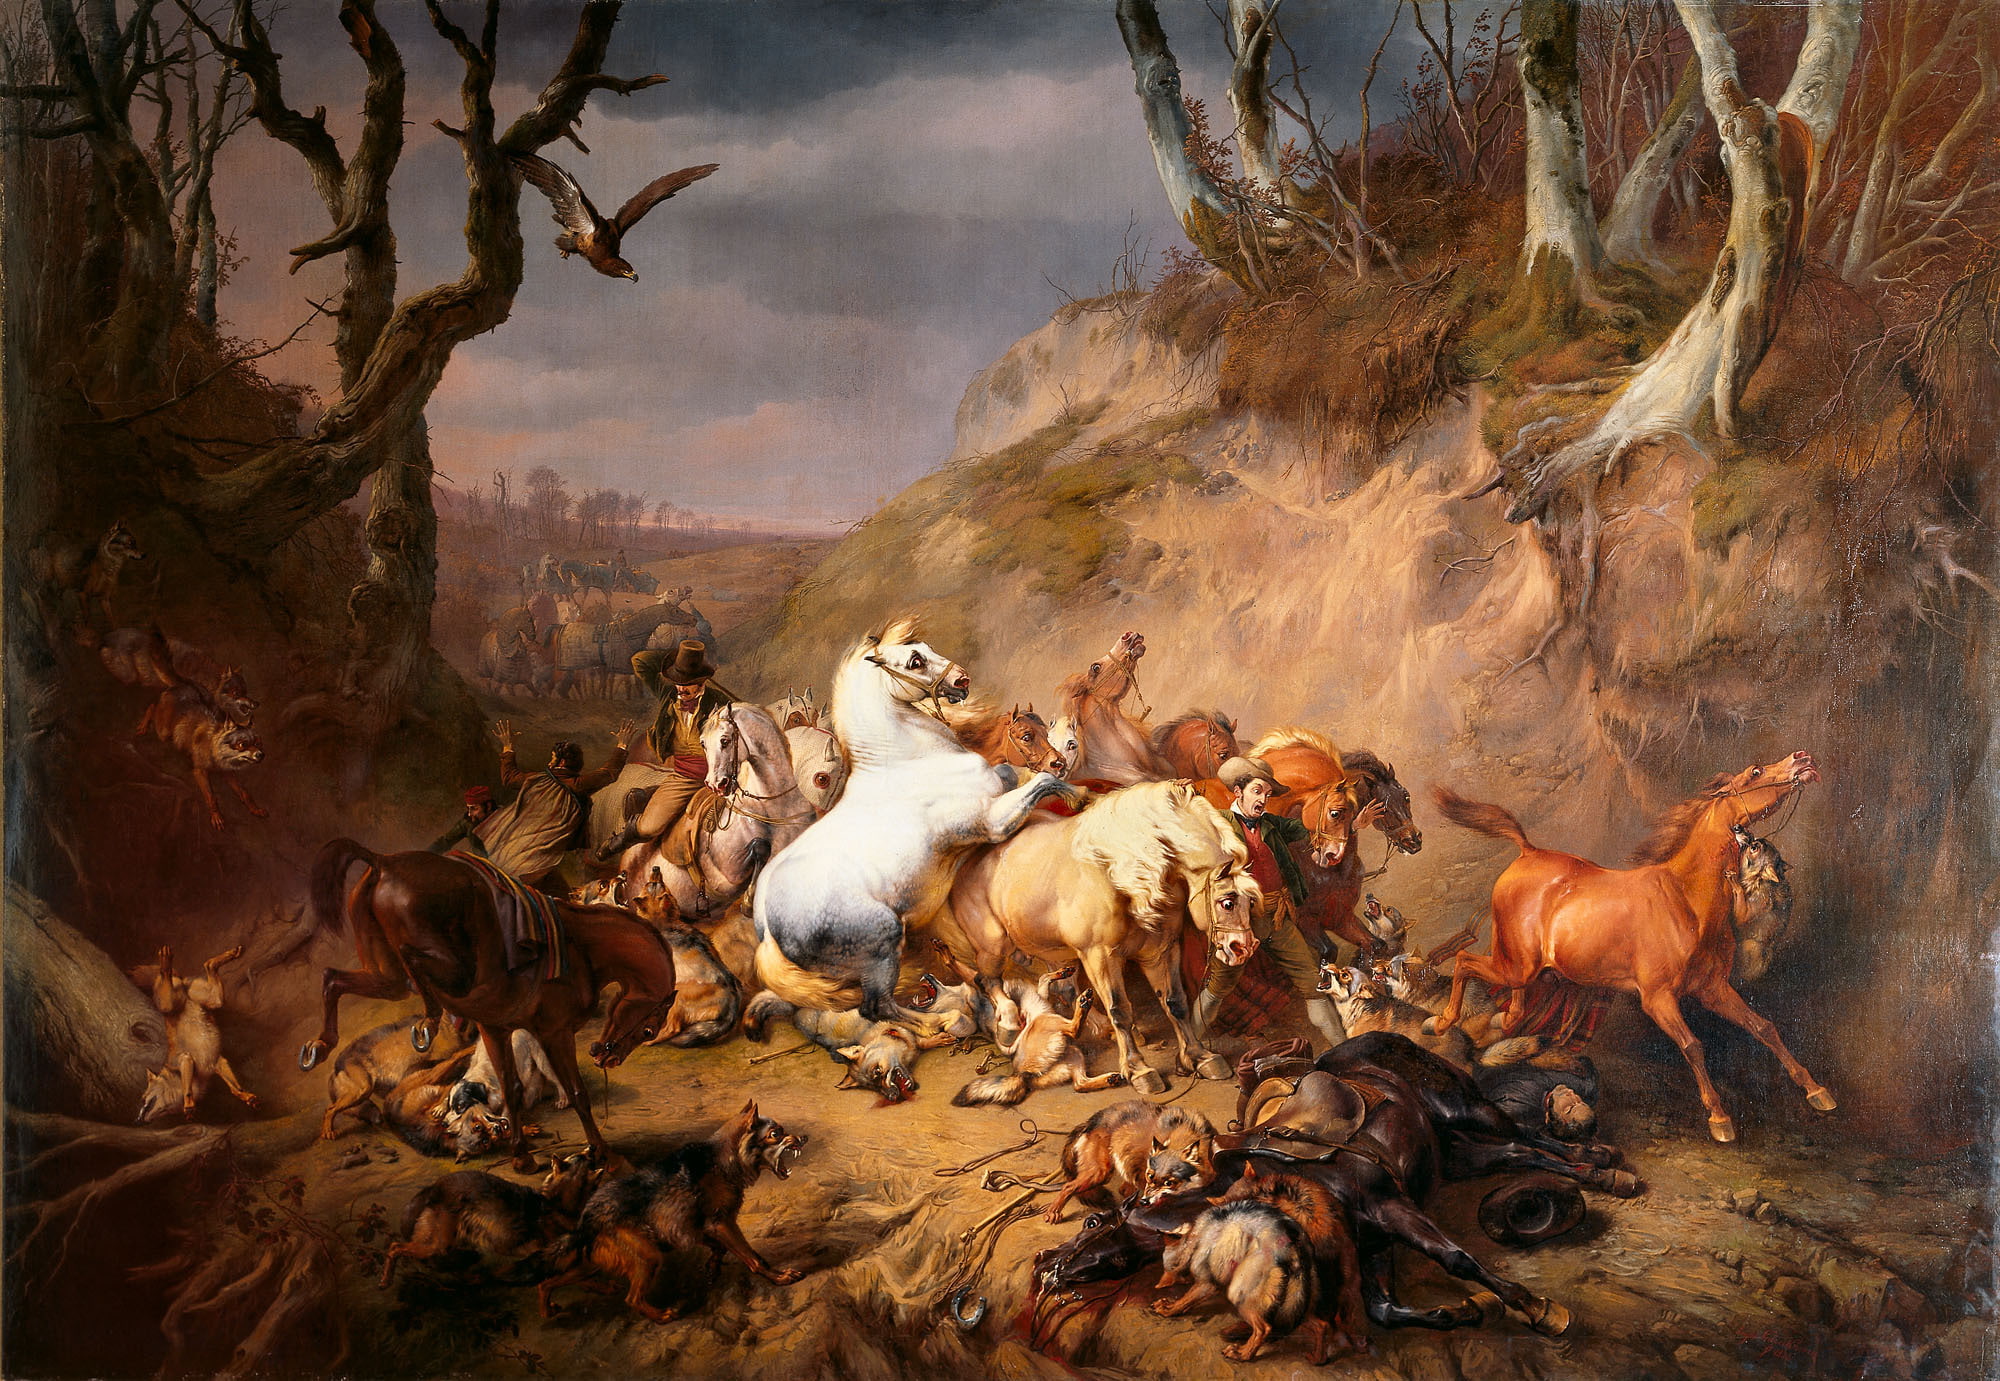 brown and white horse painting, landscape, people, eagle, blood